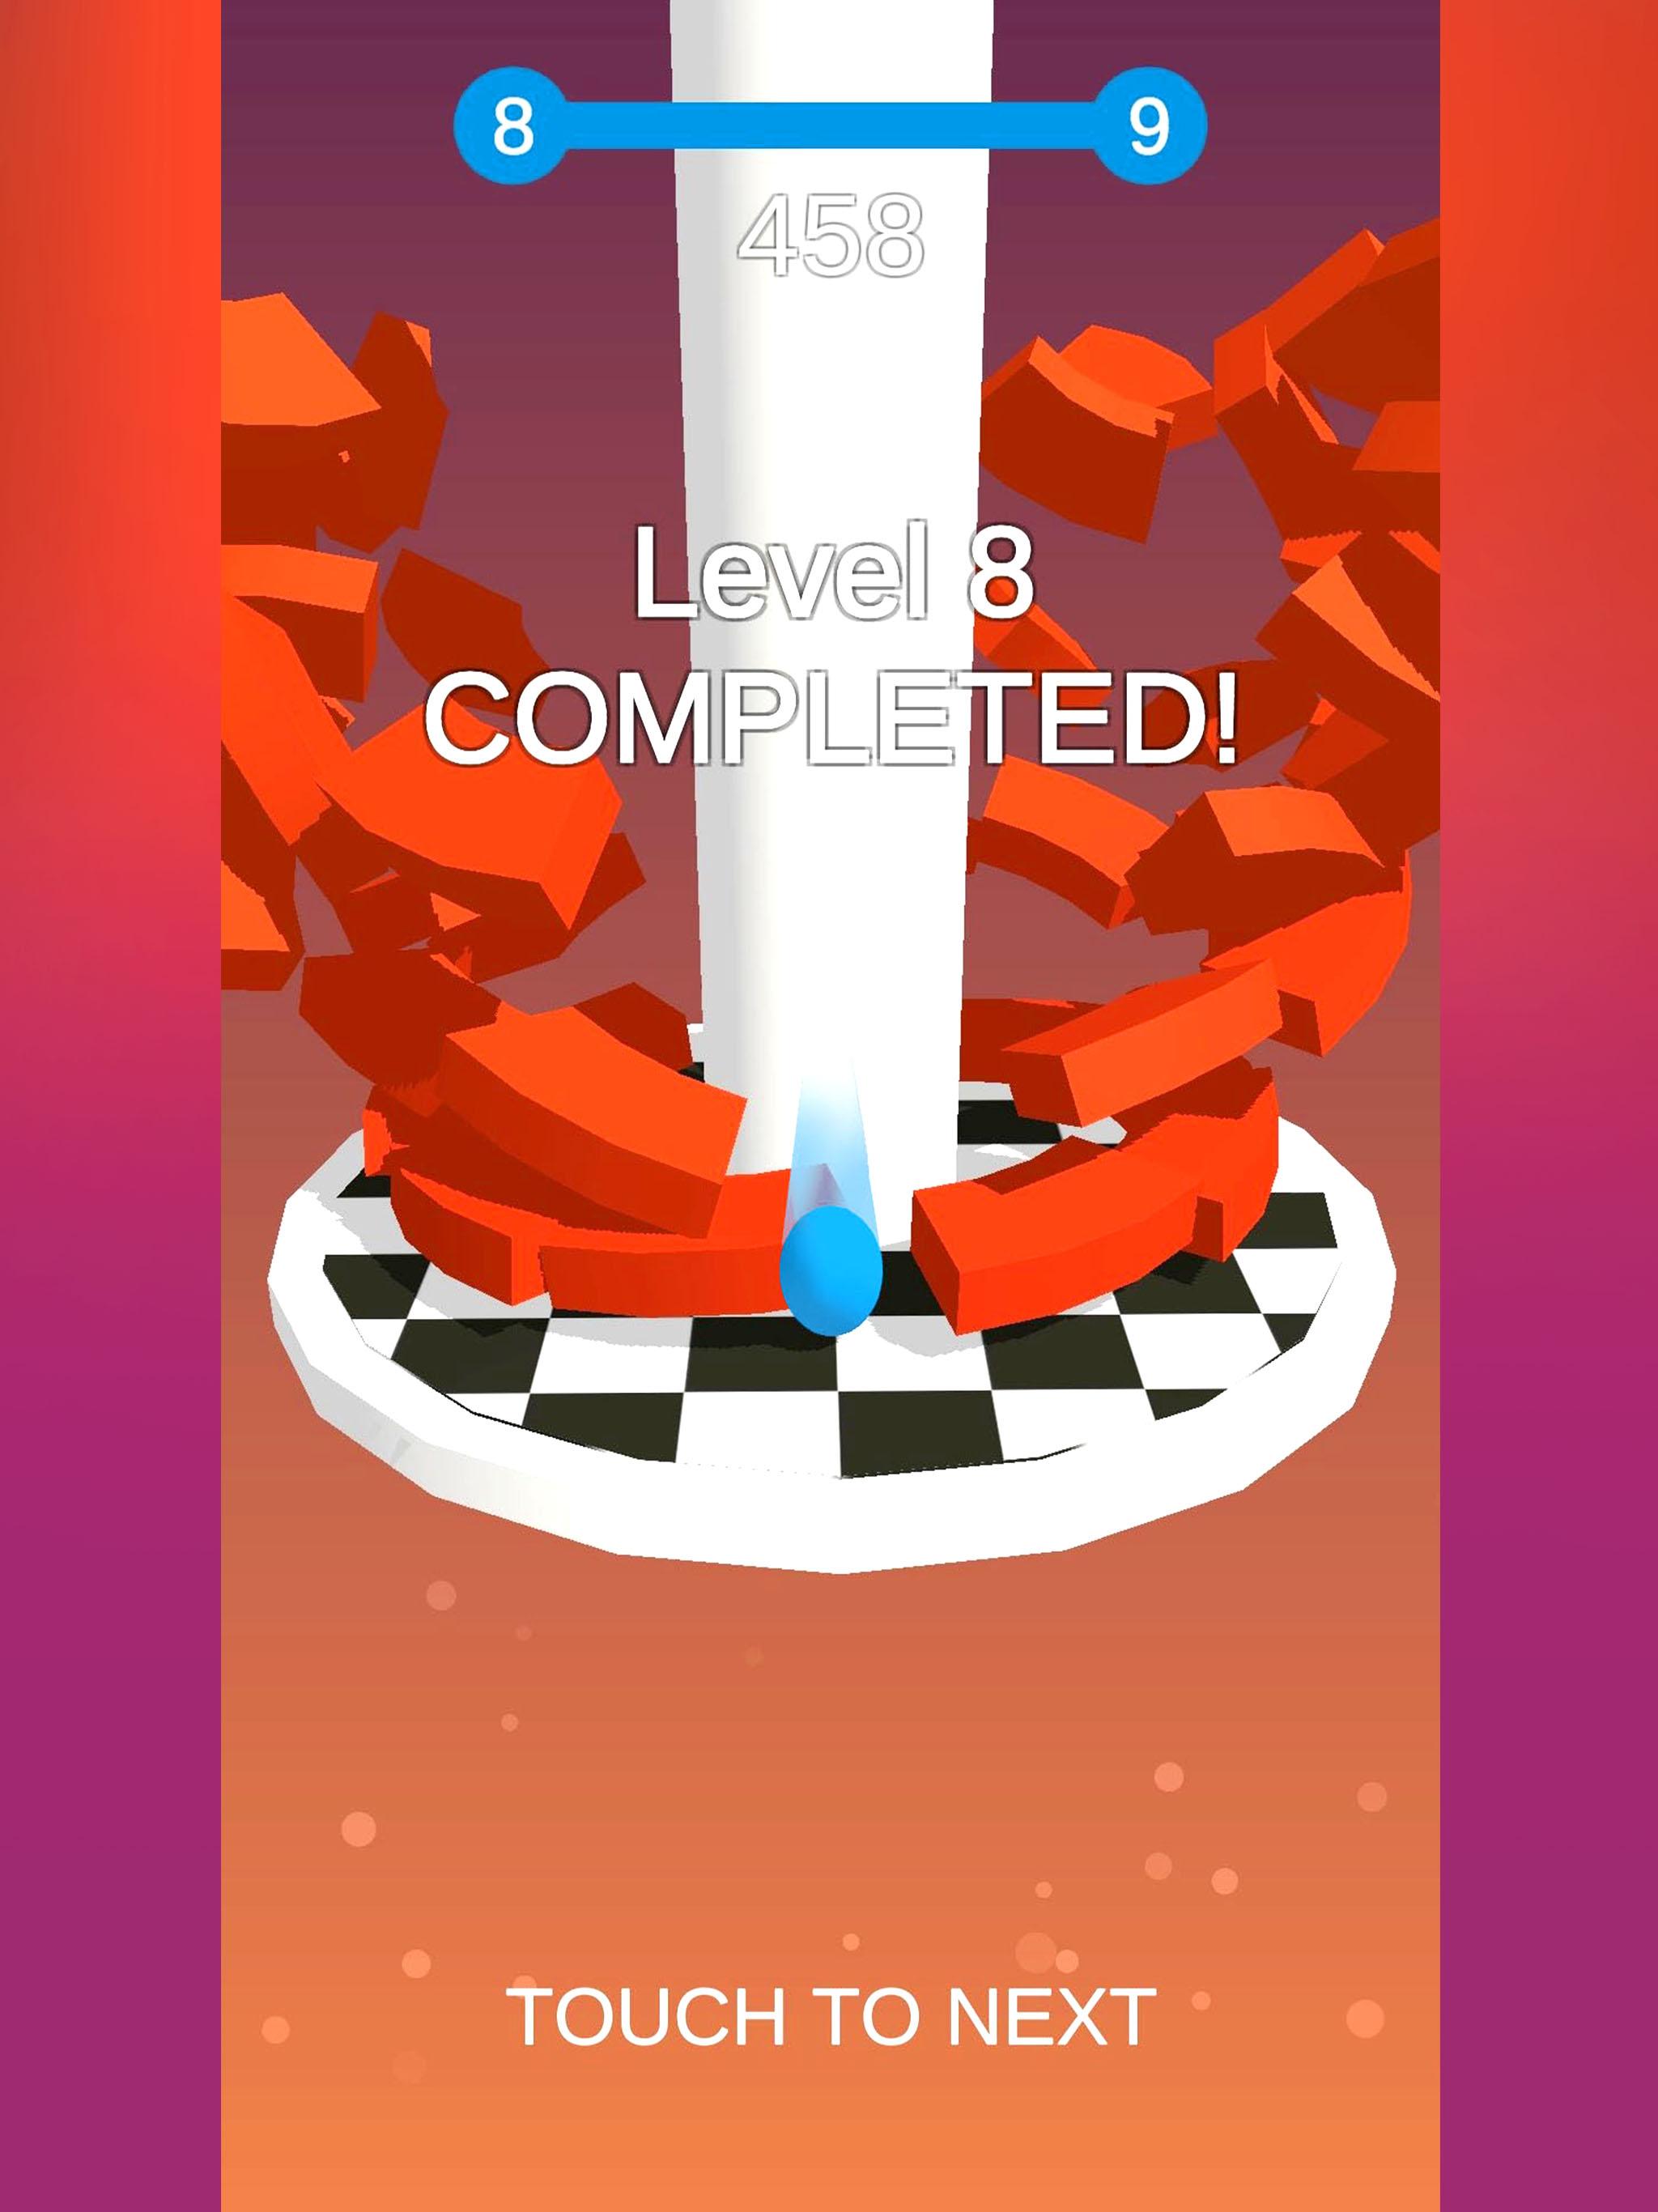 Stack Ball for Android - APK Download - 